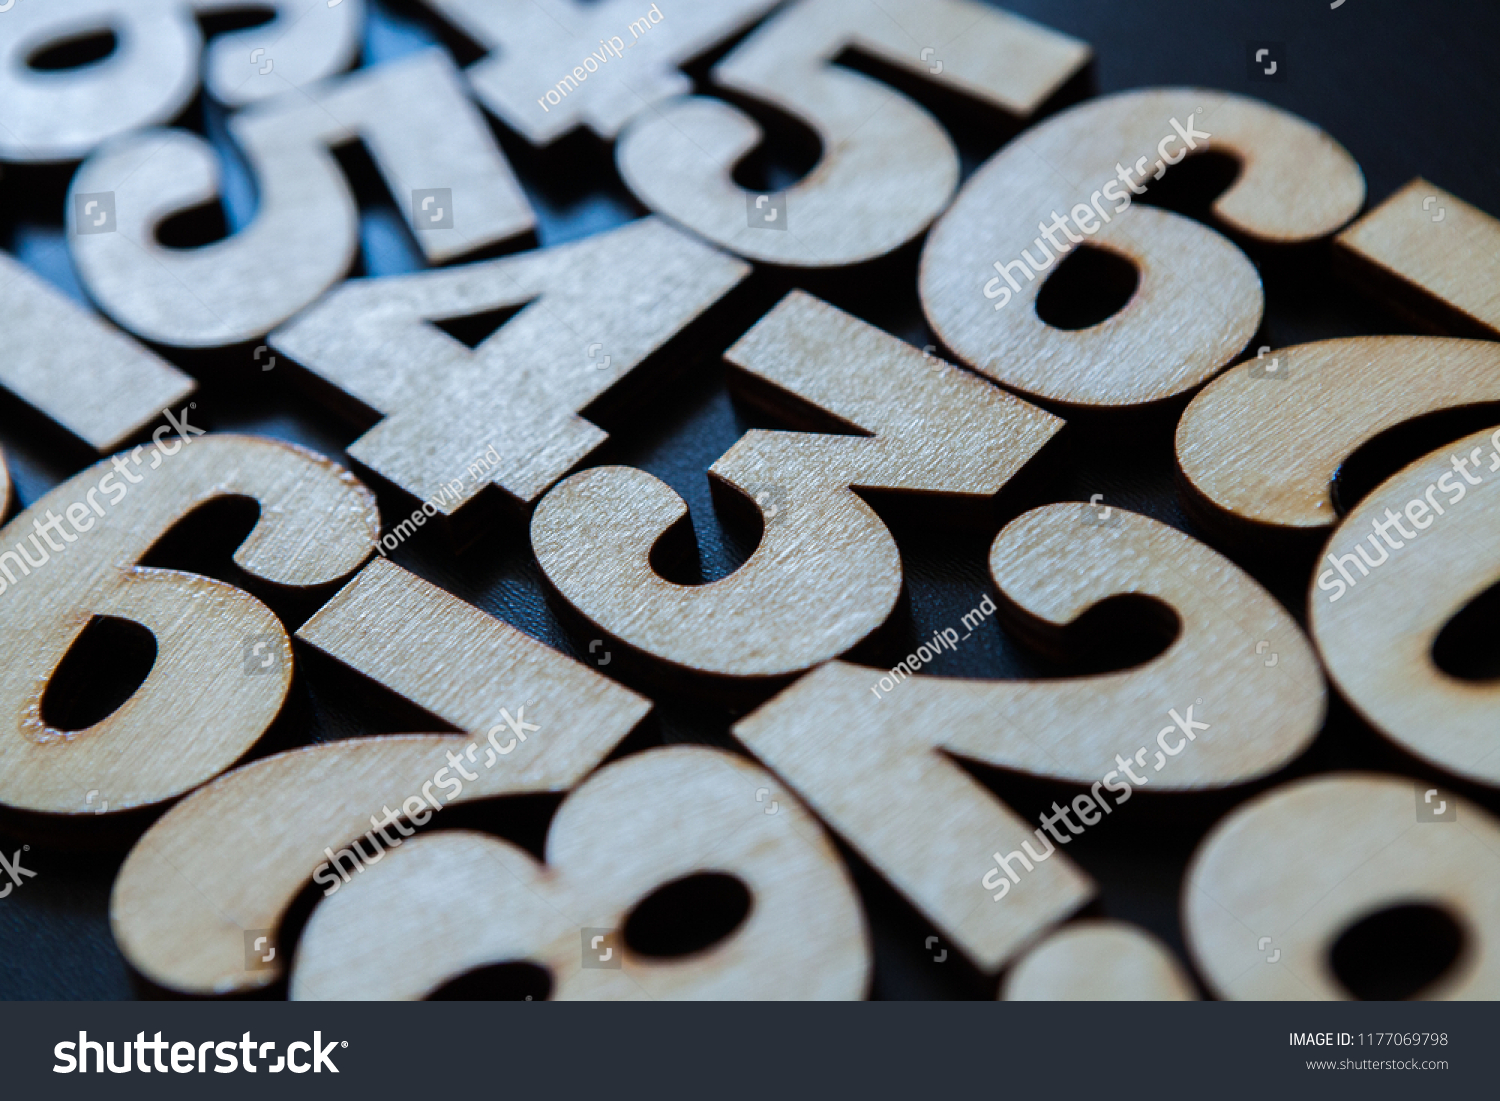 Background of numbers. from zero to nine. Background with numbers. Numbers texture #1177069798